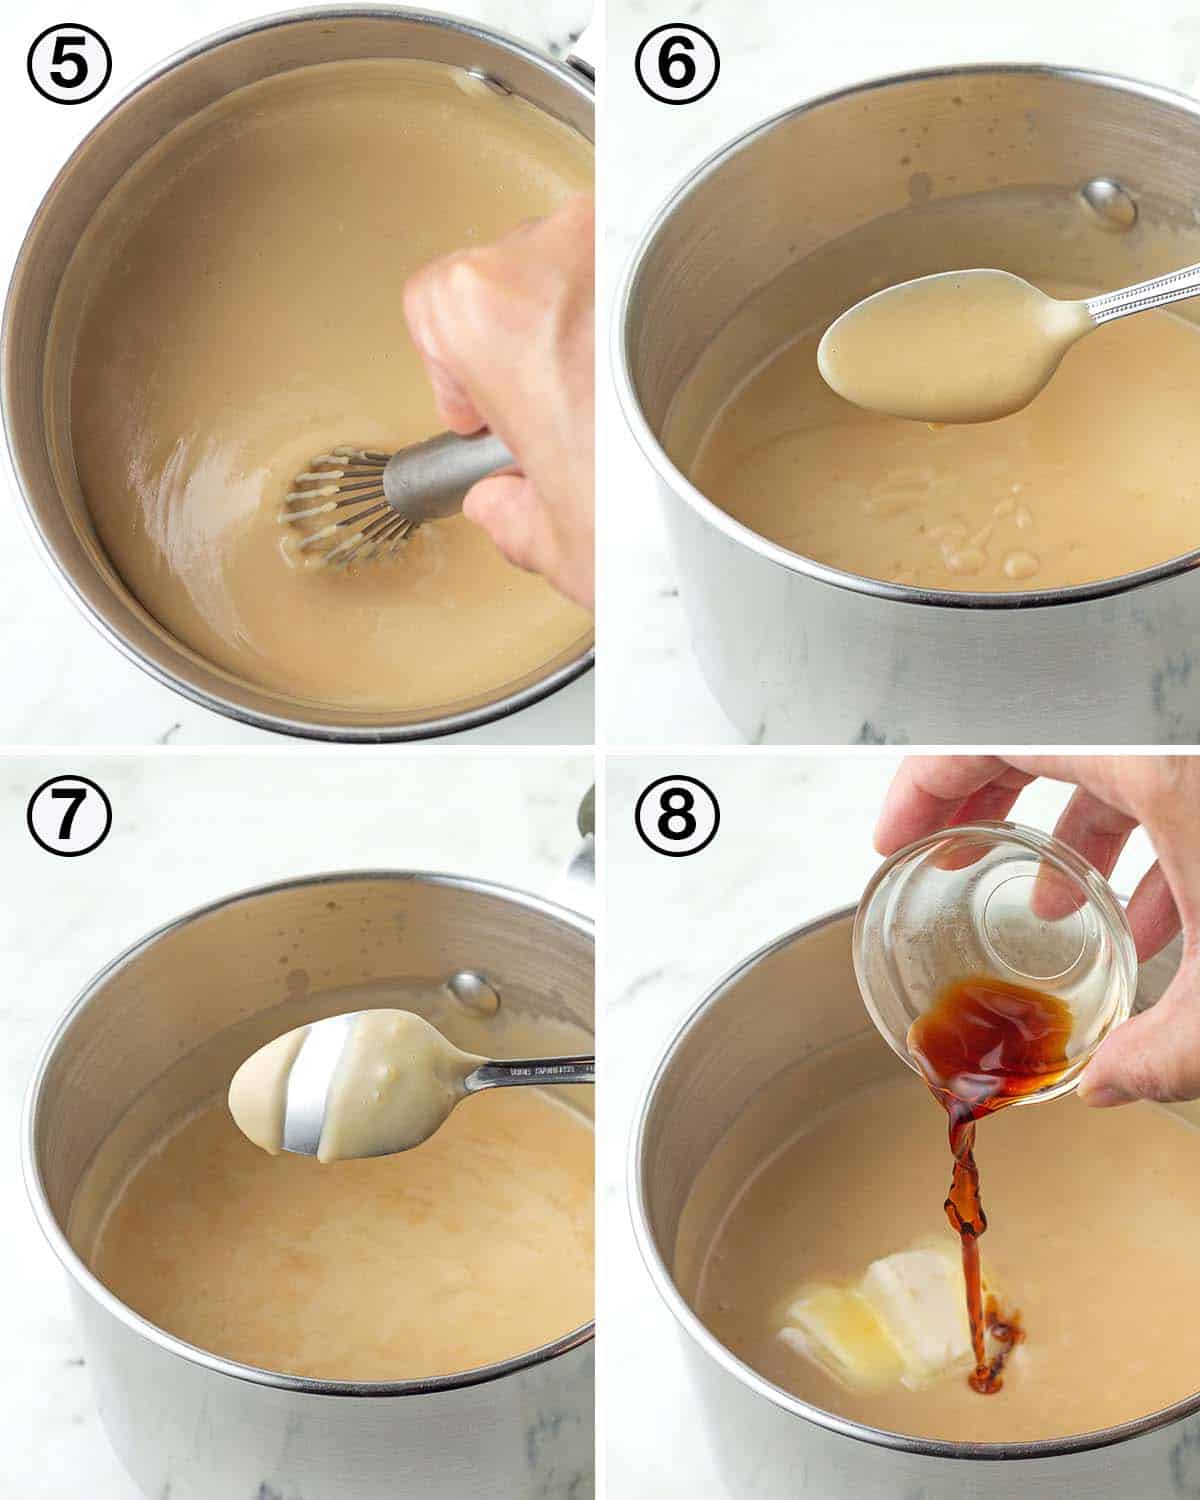 A collage of four images showing the second sequence of steps needed to make vegan butterscotch pudding.